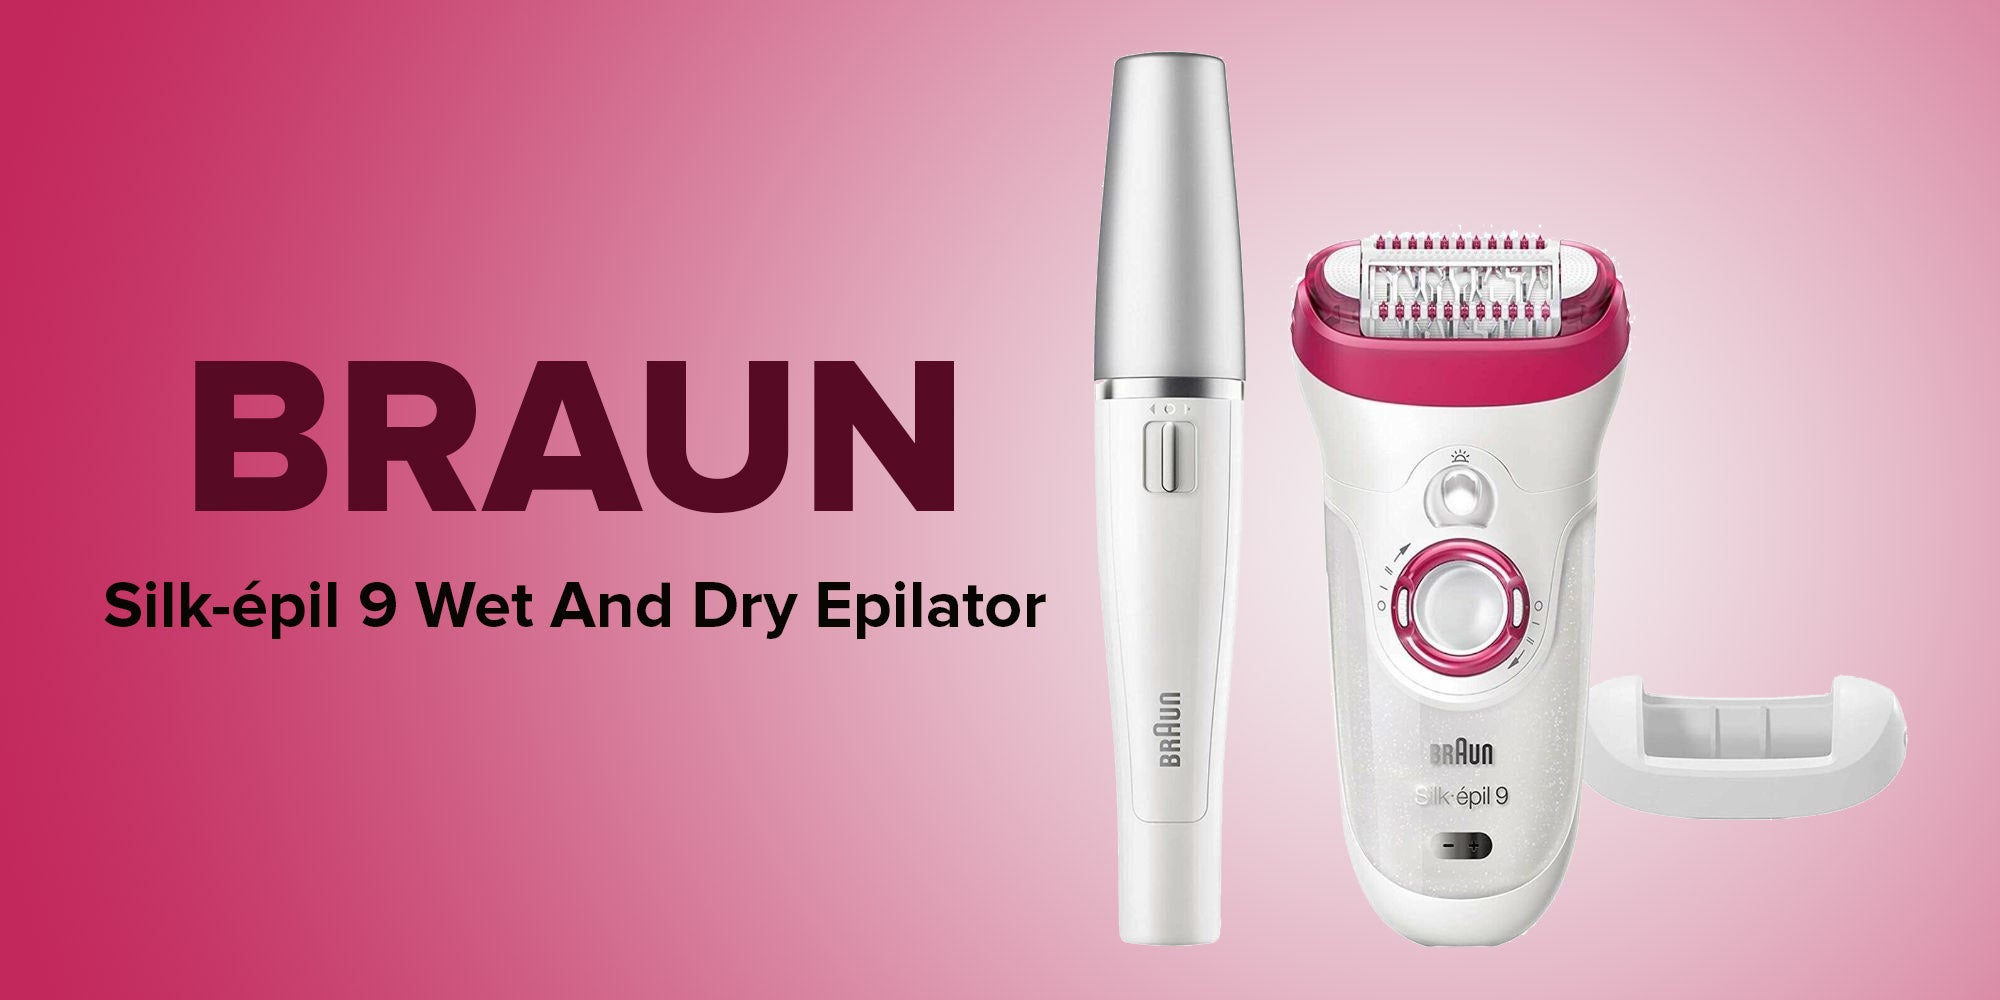 Silk-epil 9 Wet And Dry Epilator 9-538 Legs, Body And Face White/Pink